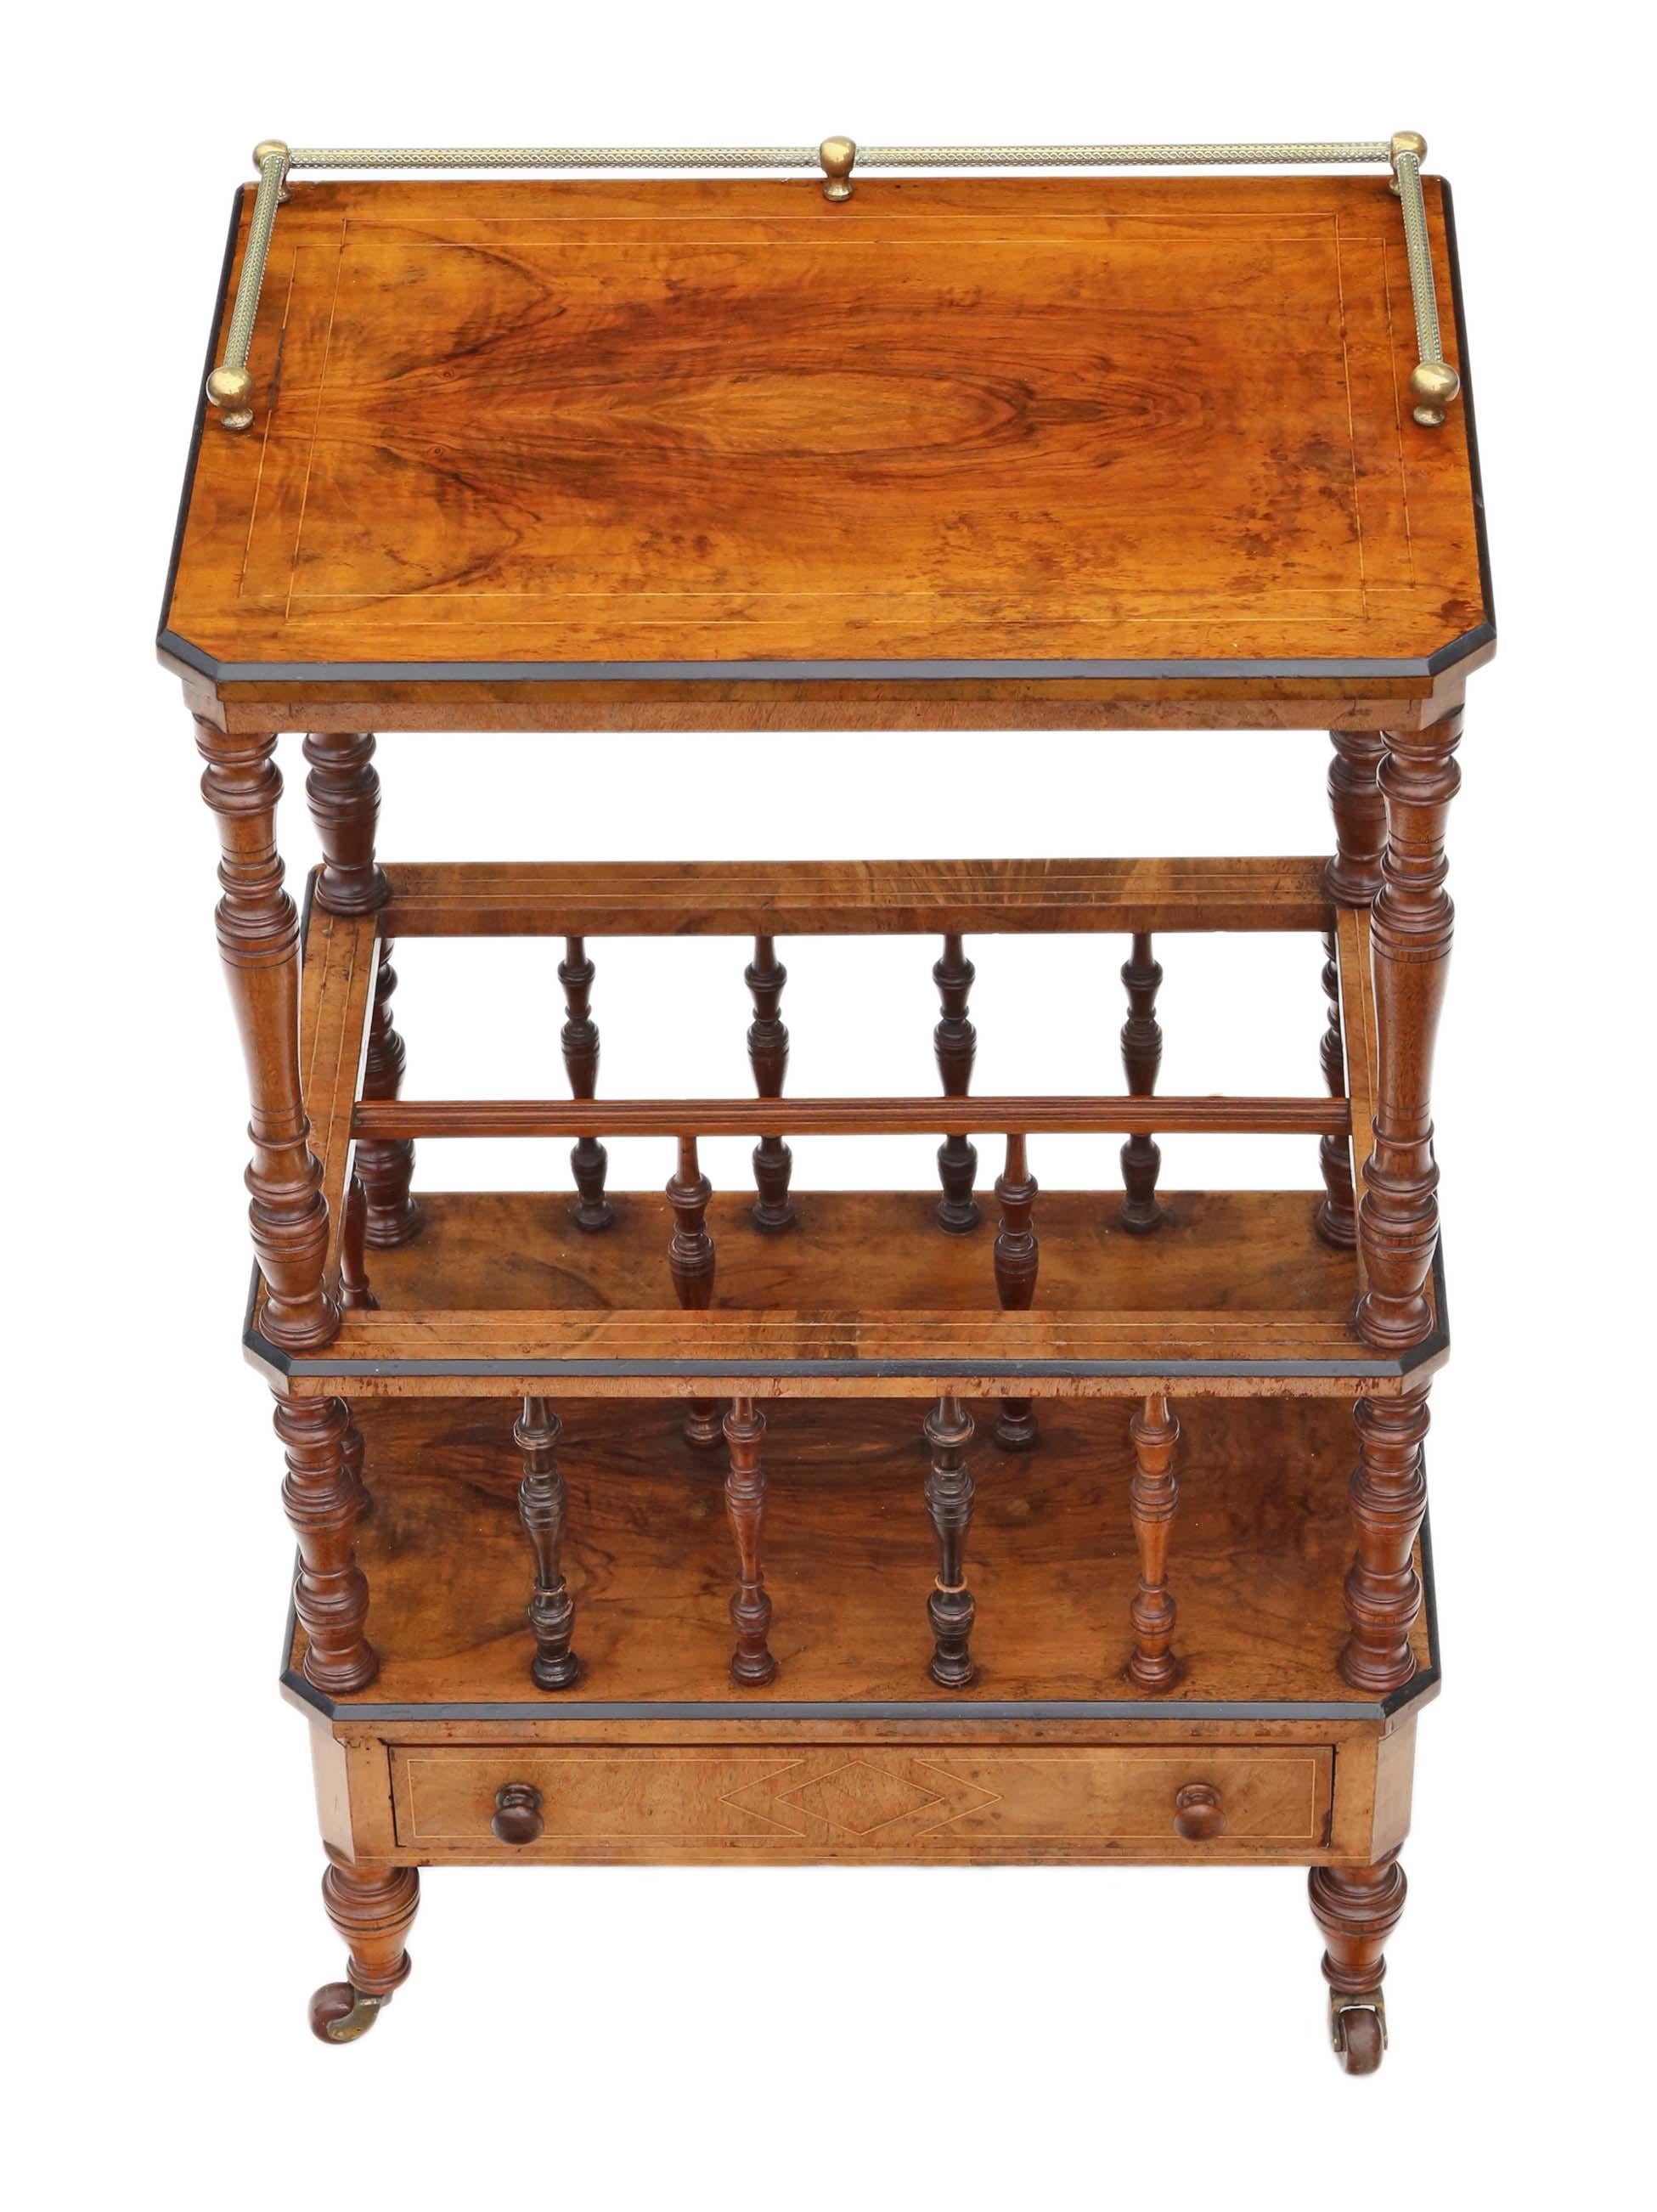 Antique quality Victorian Aesthetic circa 1880 burr walnut Canterbury whatnot or magazine rack.
This is a lovely item, that is full of age, charm and character.
An attractive and rare quality piece, with a lovely decorative look.
No loose joints.